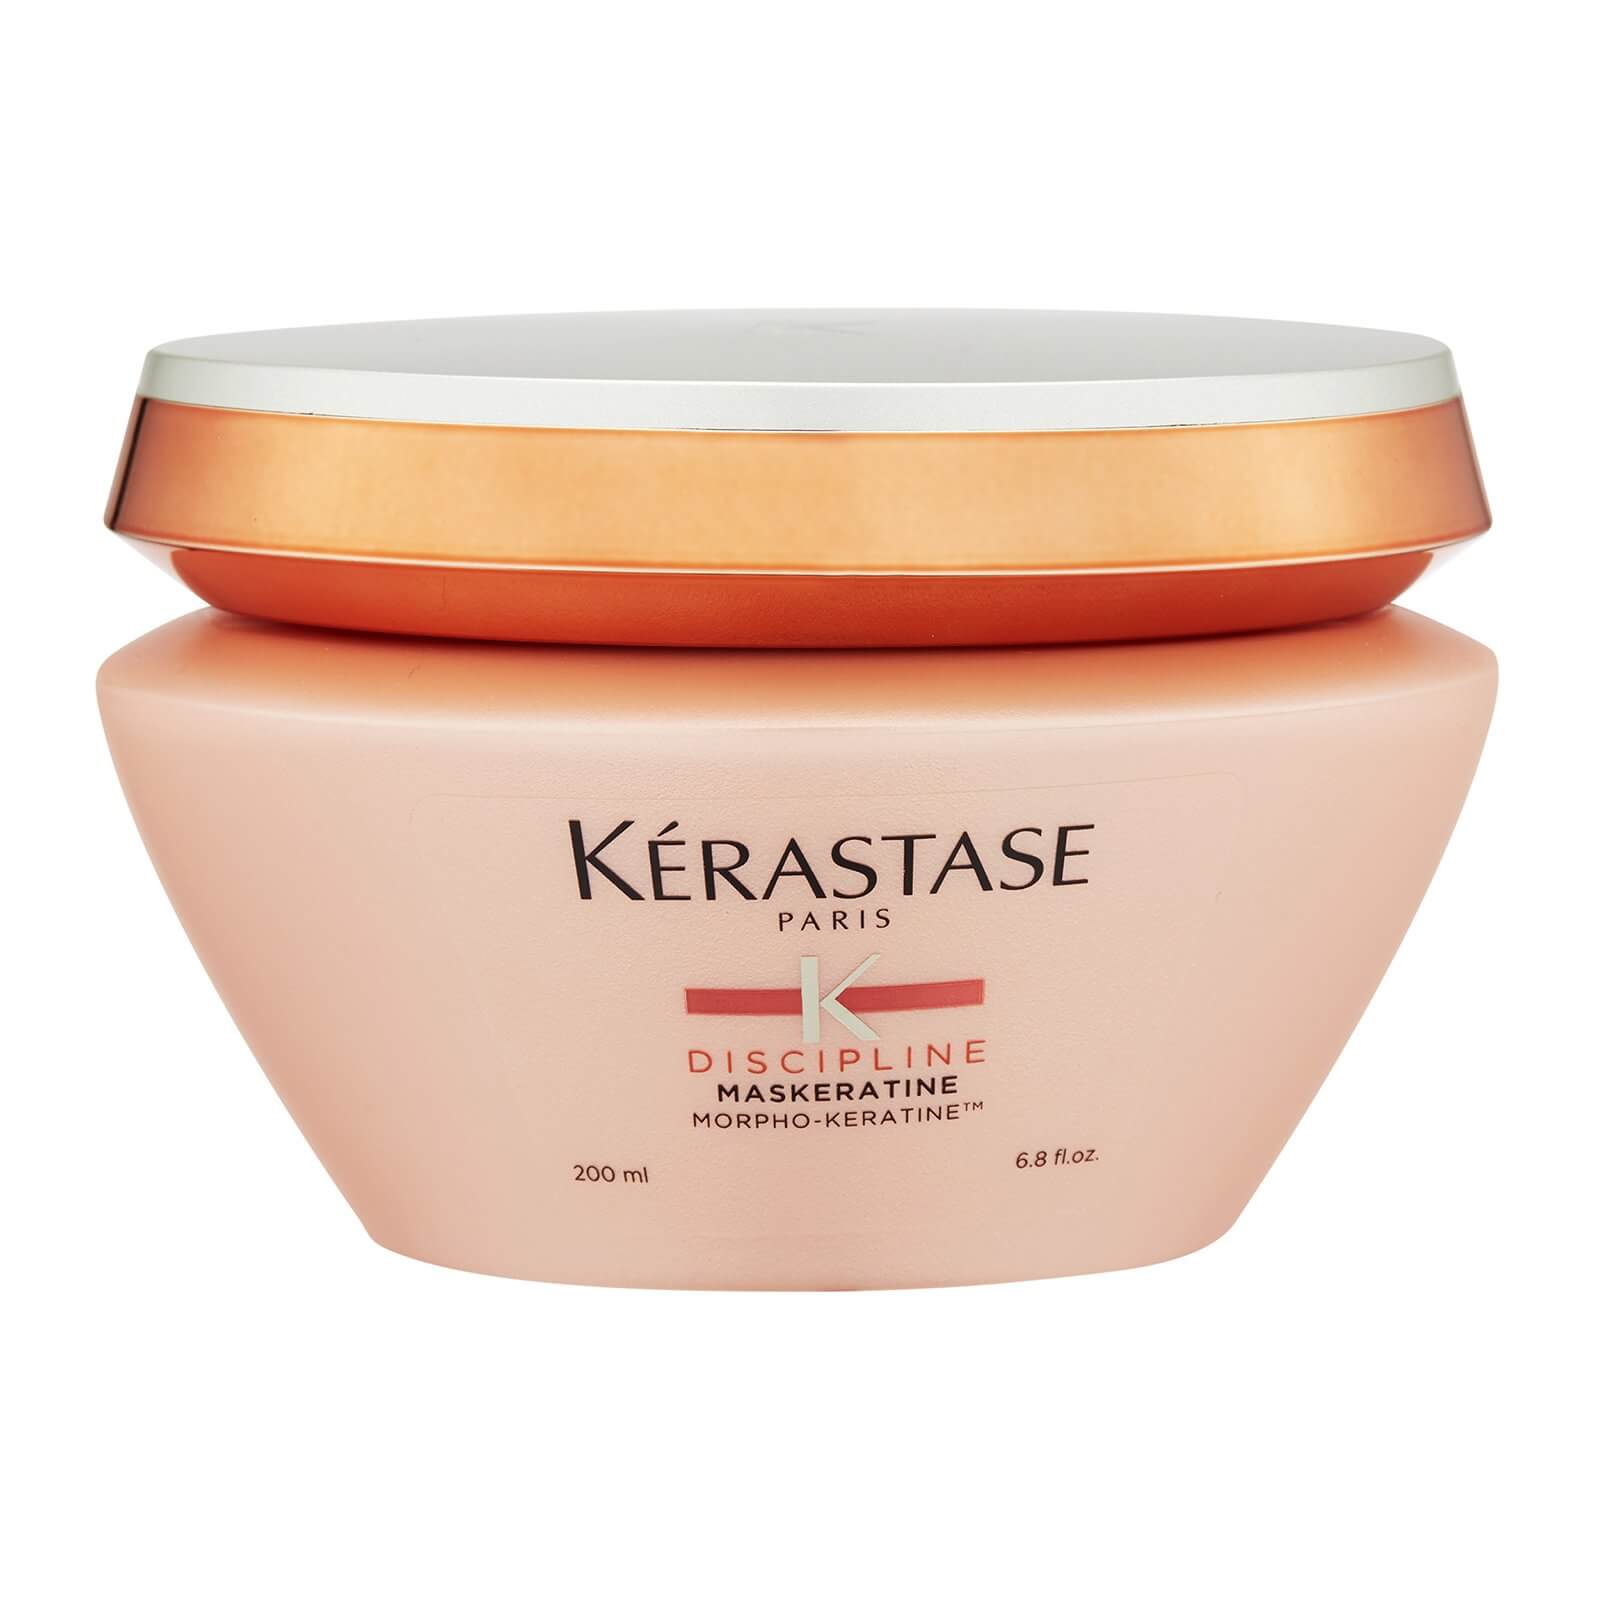 Maskeratine Smooth-In-Motion Masque - High Concentration (For Unruly, Rebellious Hair)